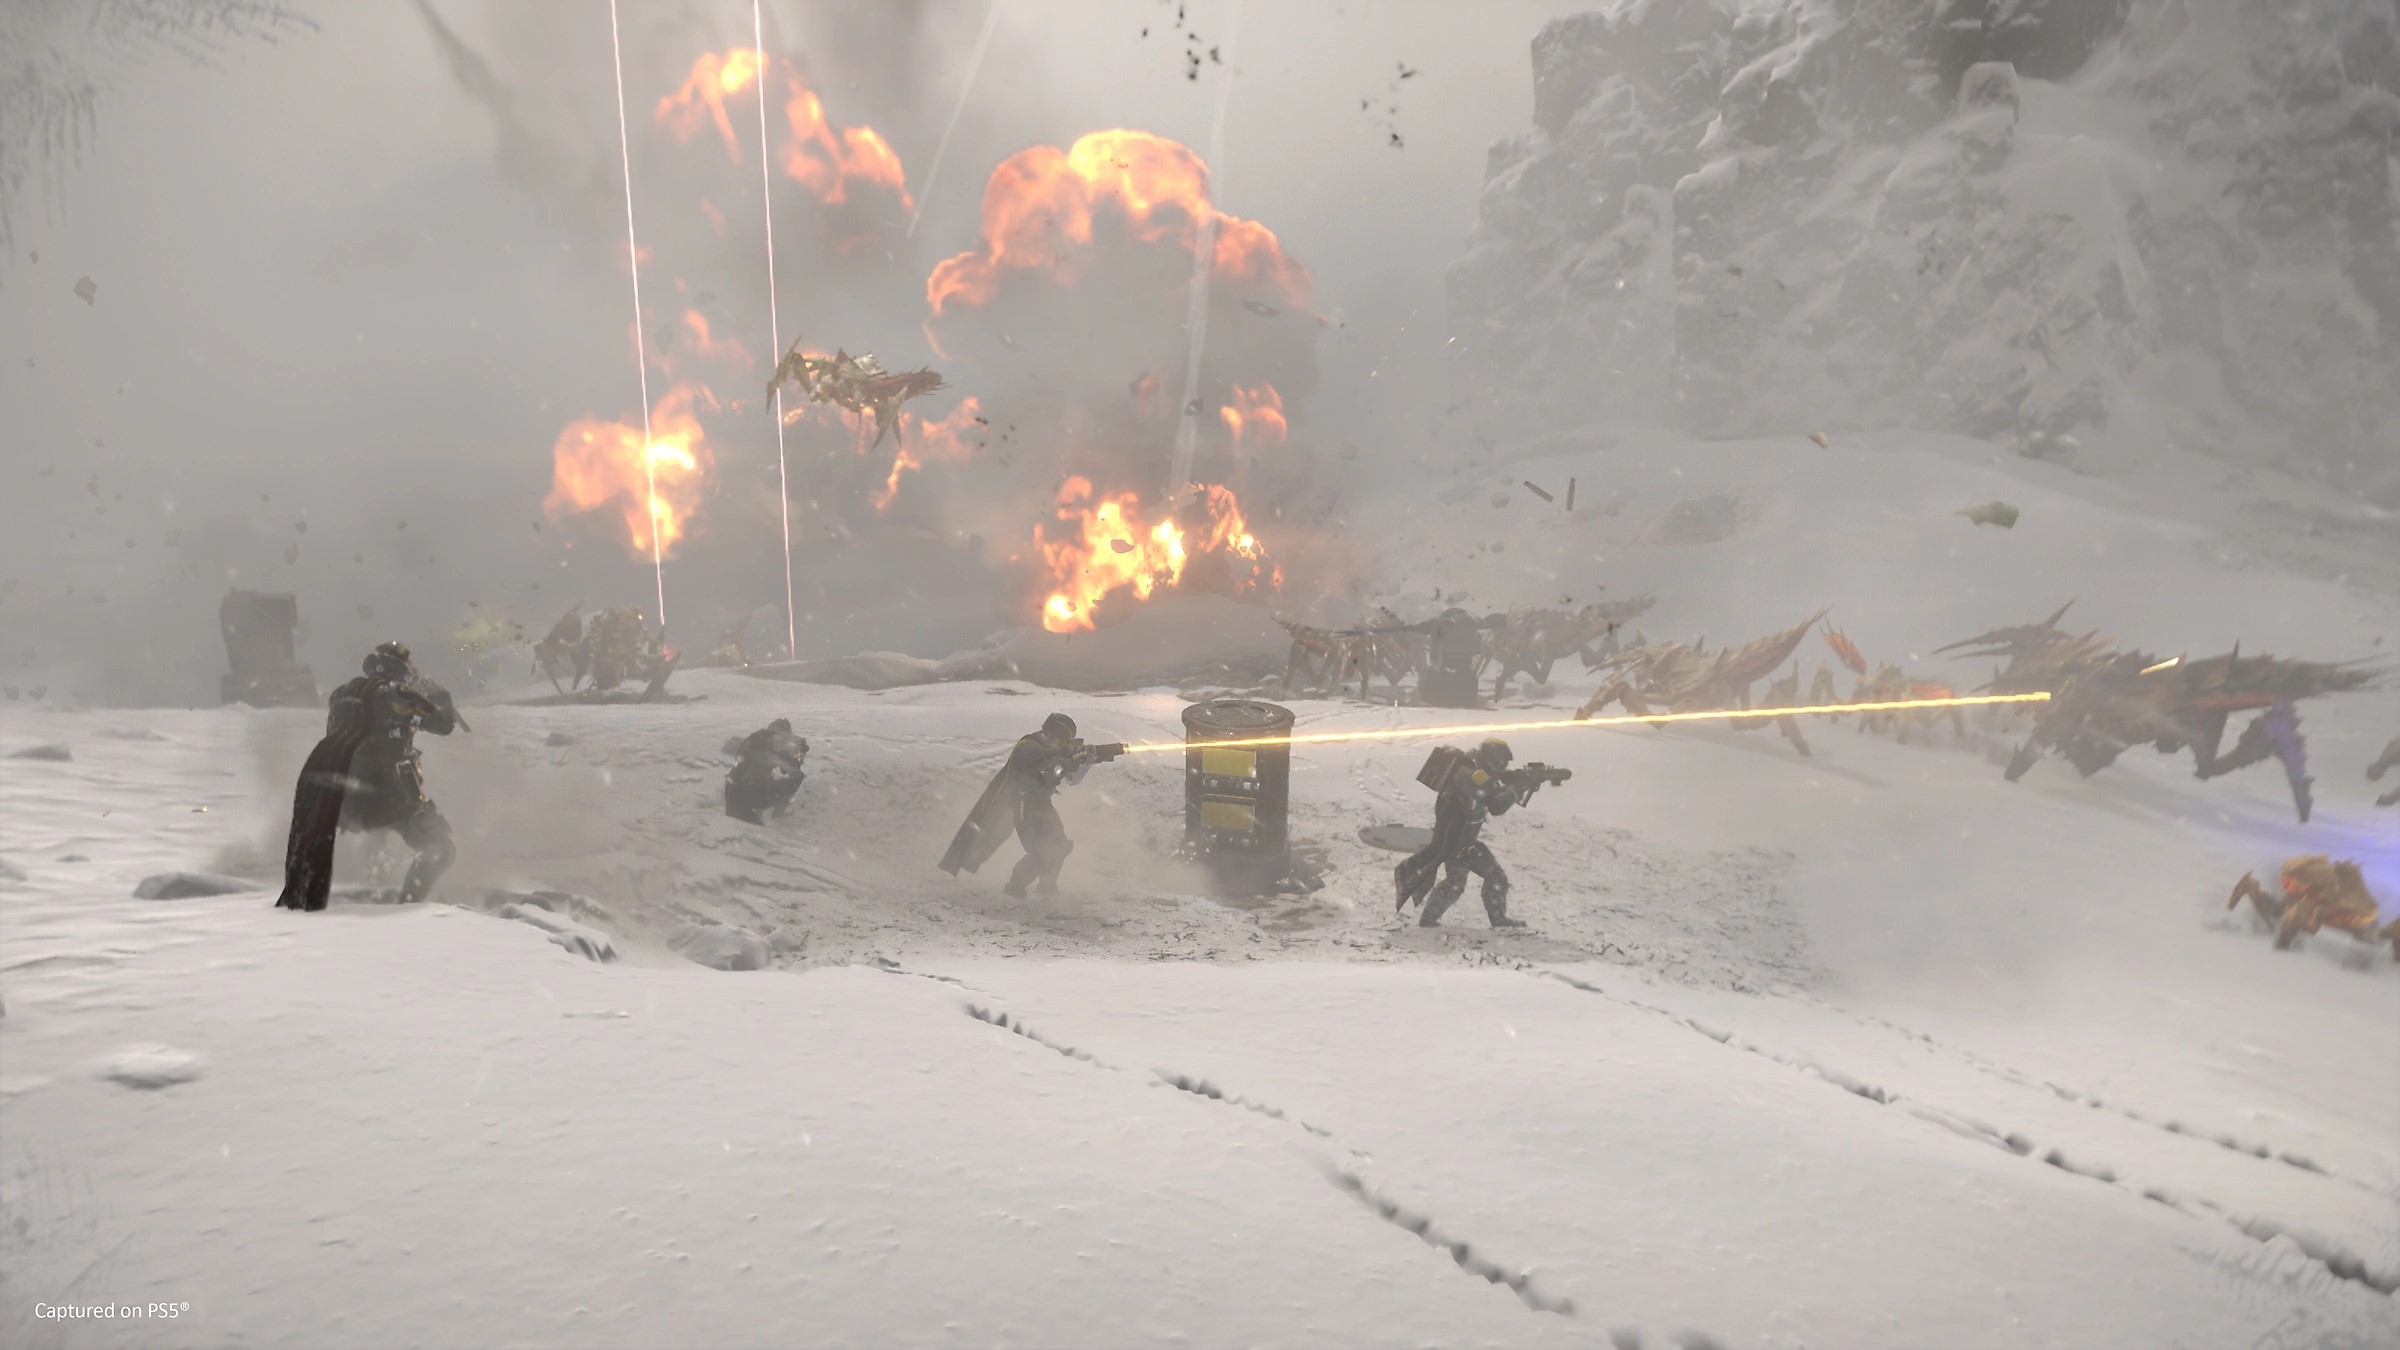 Helldivers carrying guns battle alien bugs in a snowy landscape, with explosions in the background